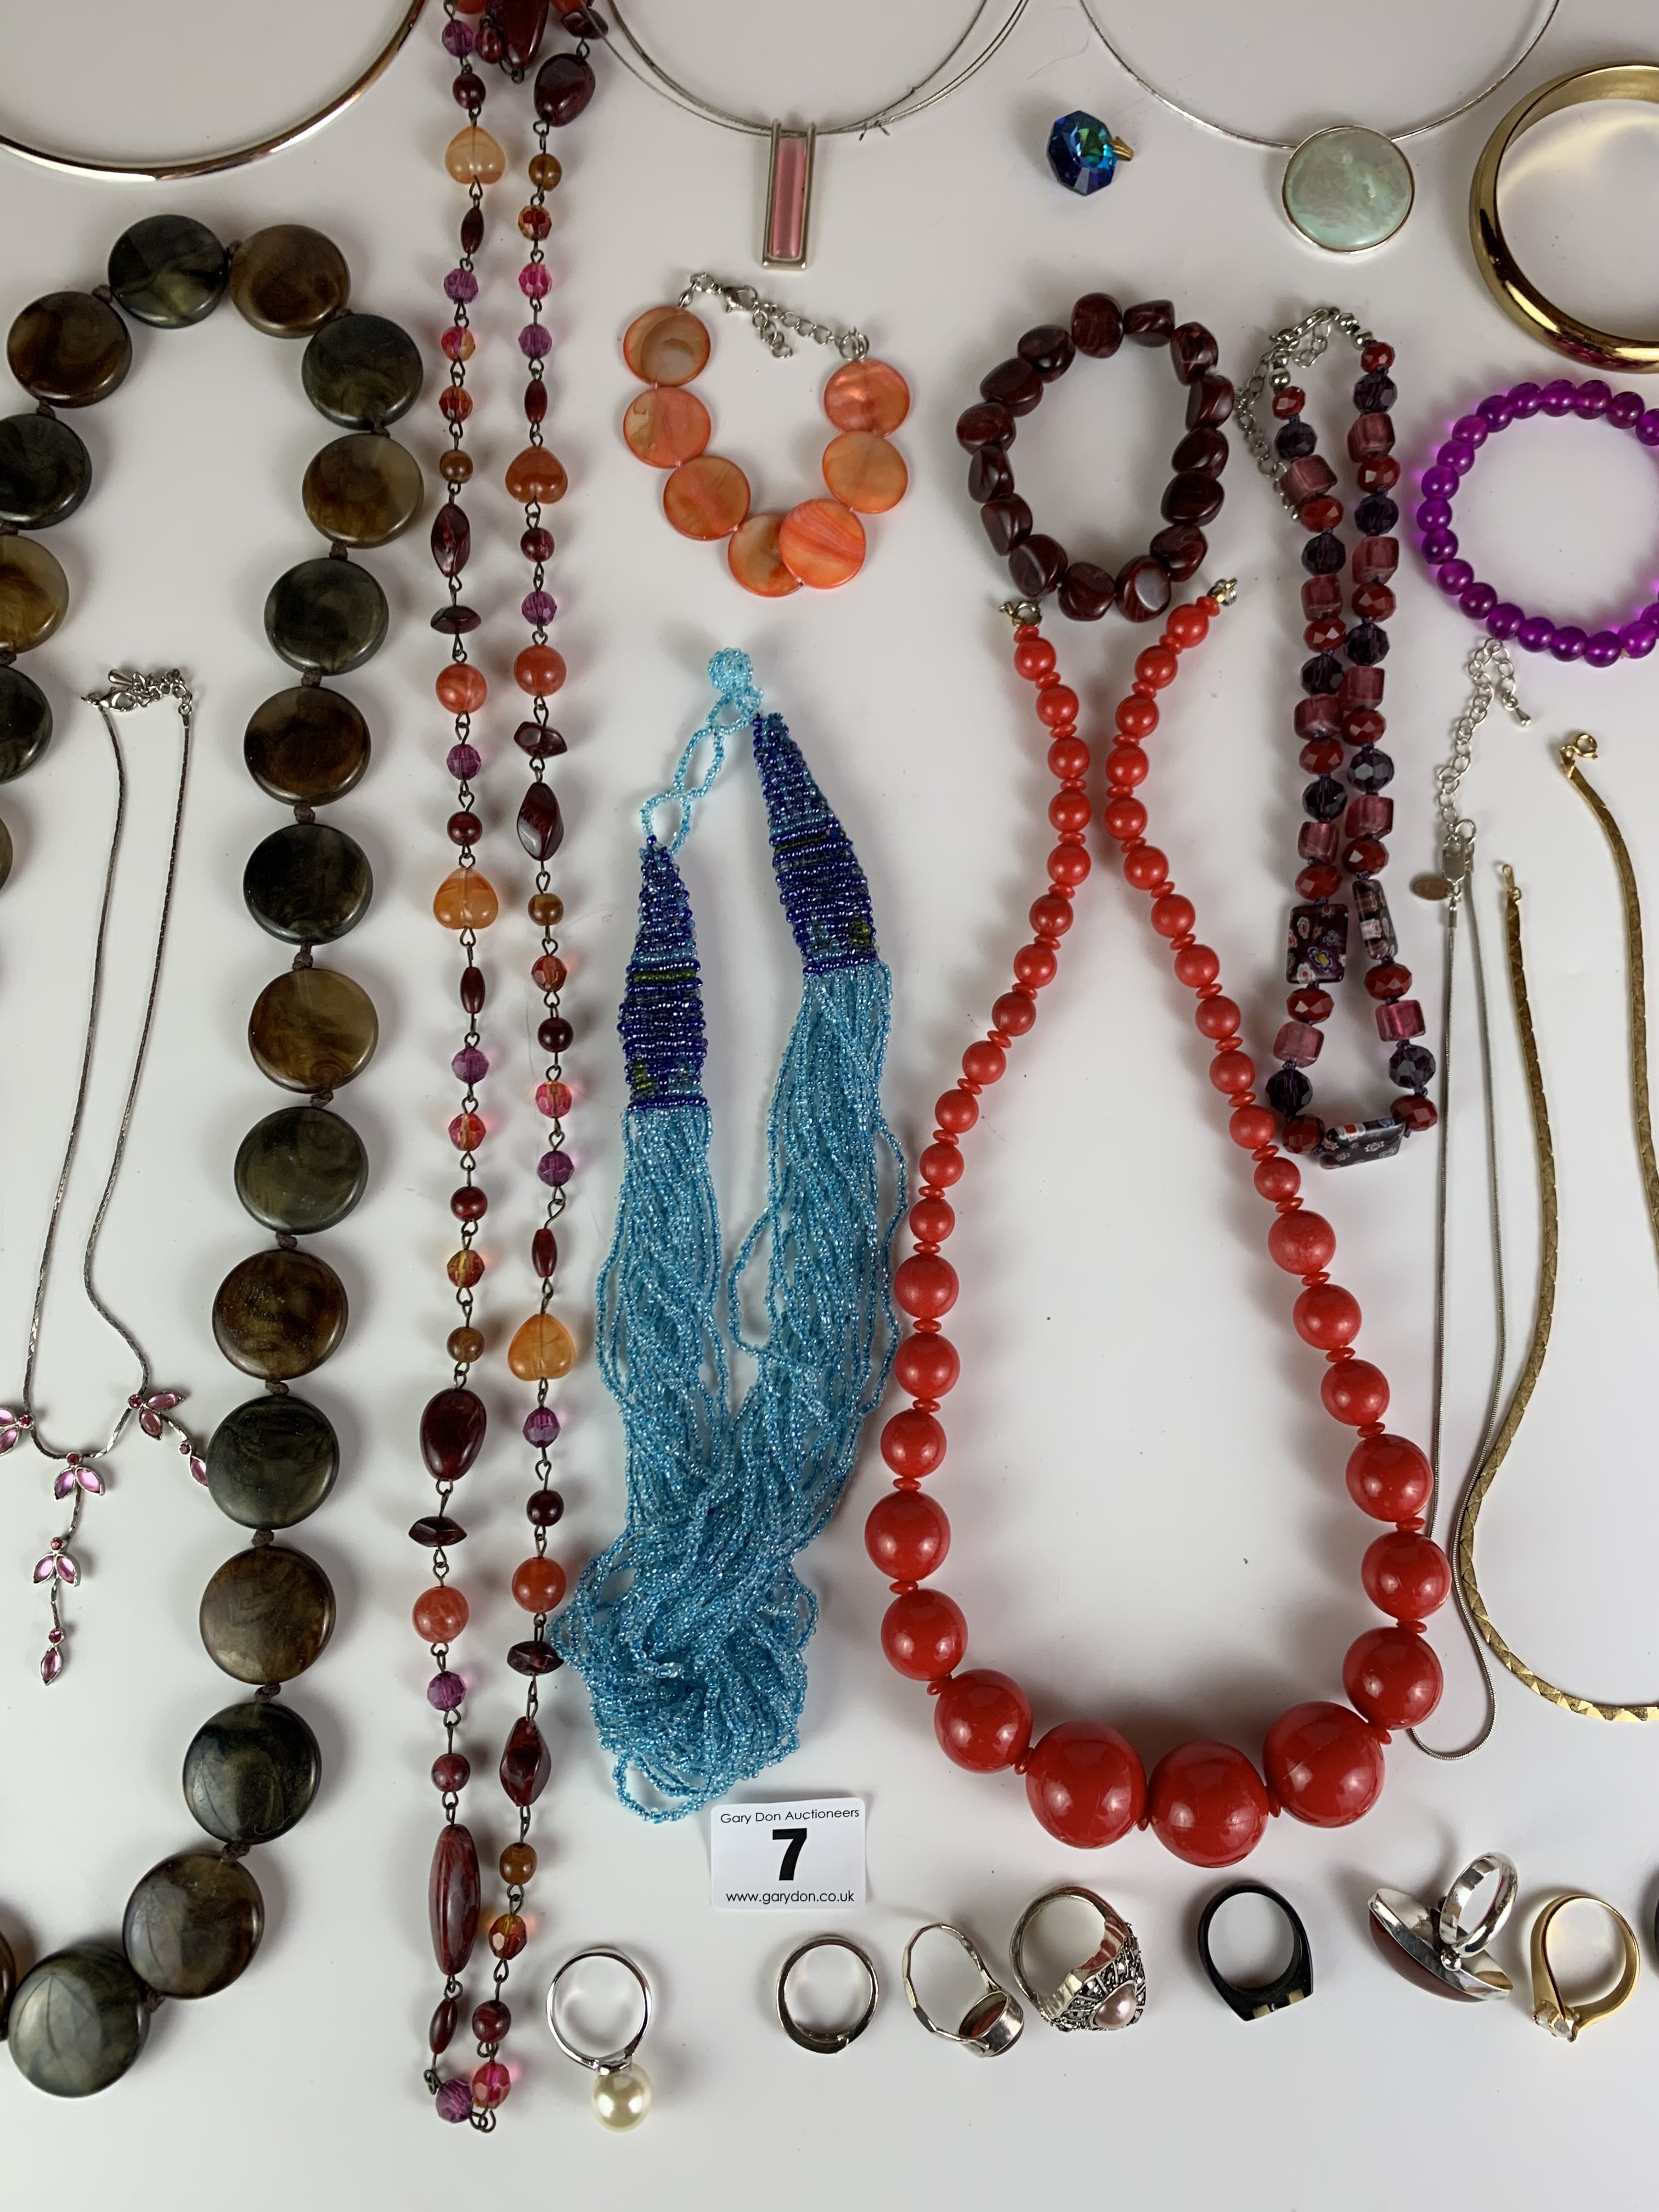 Dress jewellery including necklaces, beads, bracelets, rings etc. - Image 7 of 14